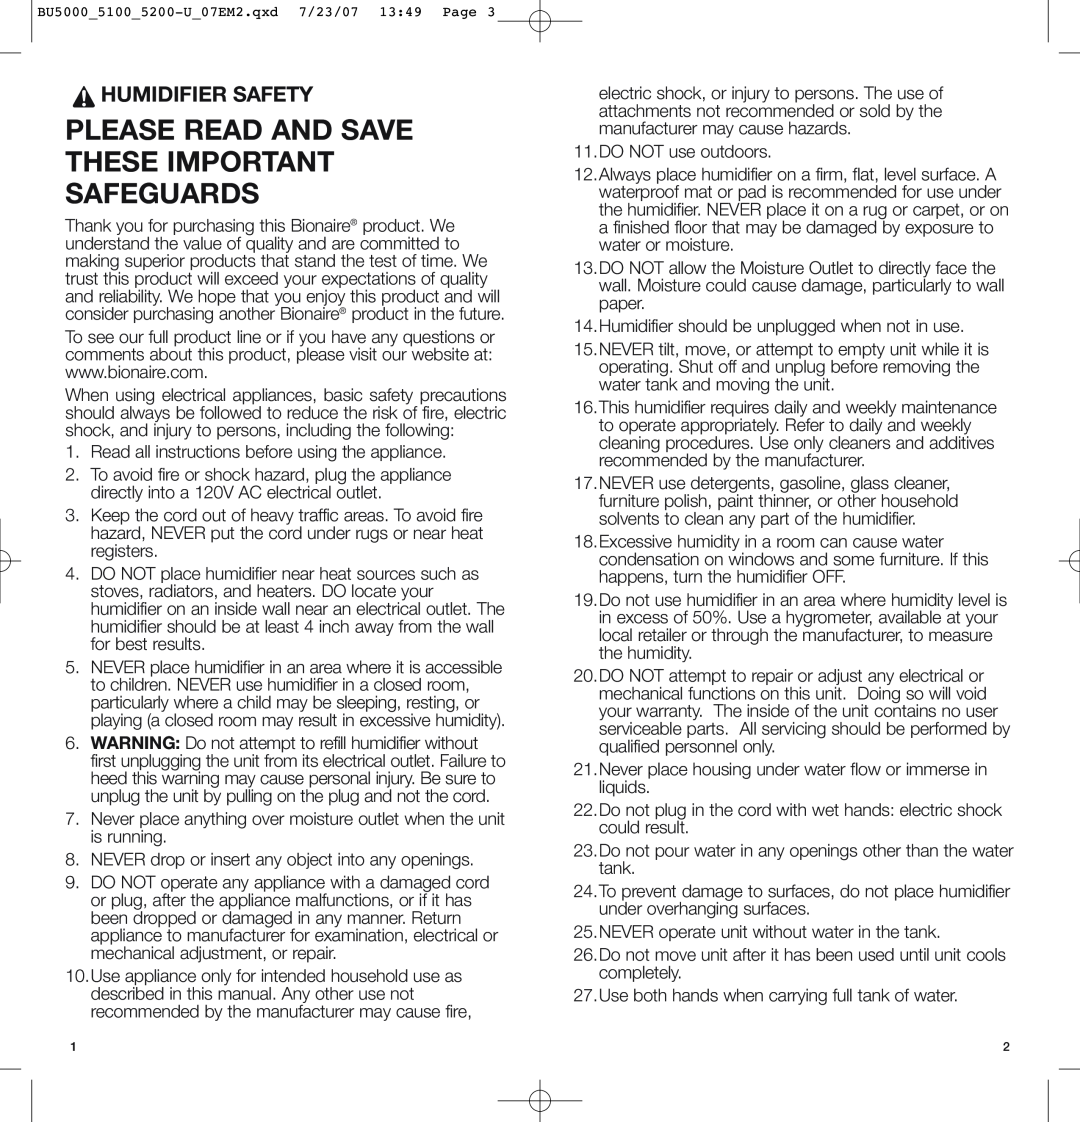 Bionaire BU5100, BU5200 instruction manual Please Read And Save These Important Safeguards, Humidifier Safety 